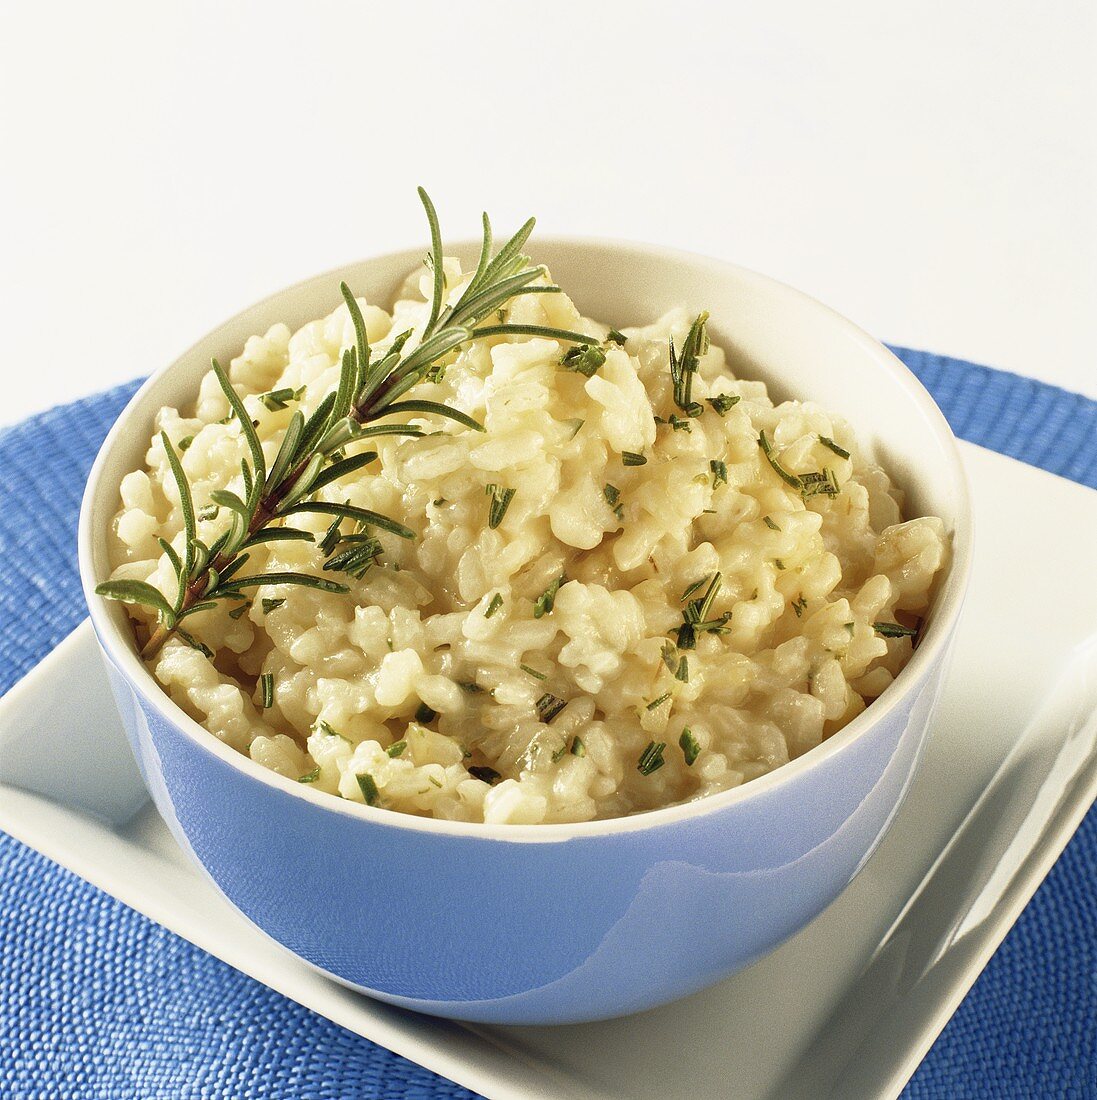 Rosemary rice in blue bowl